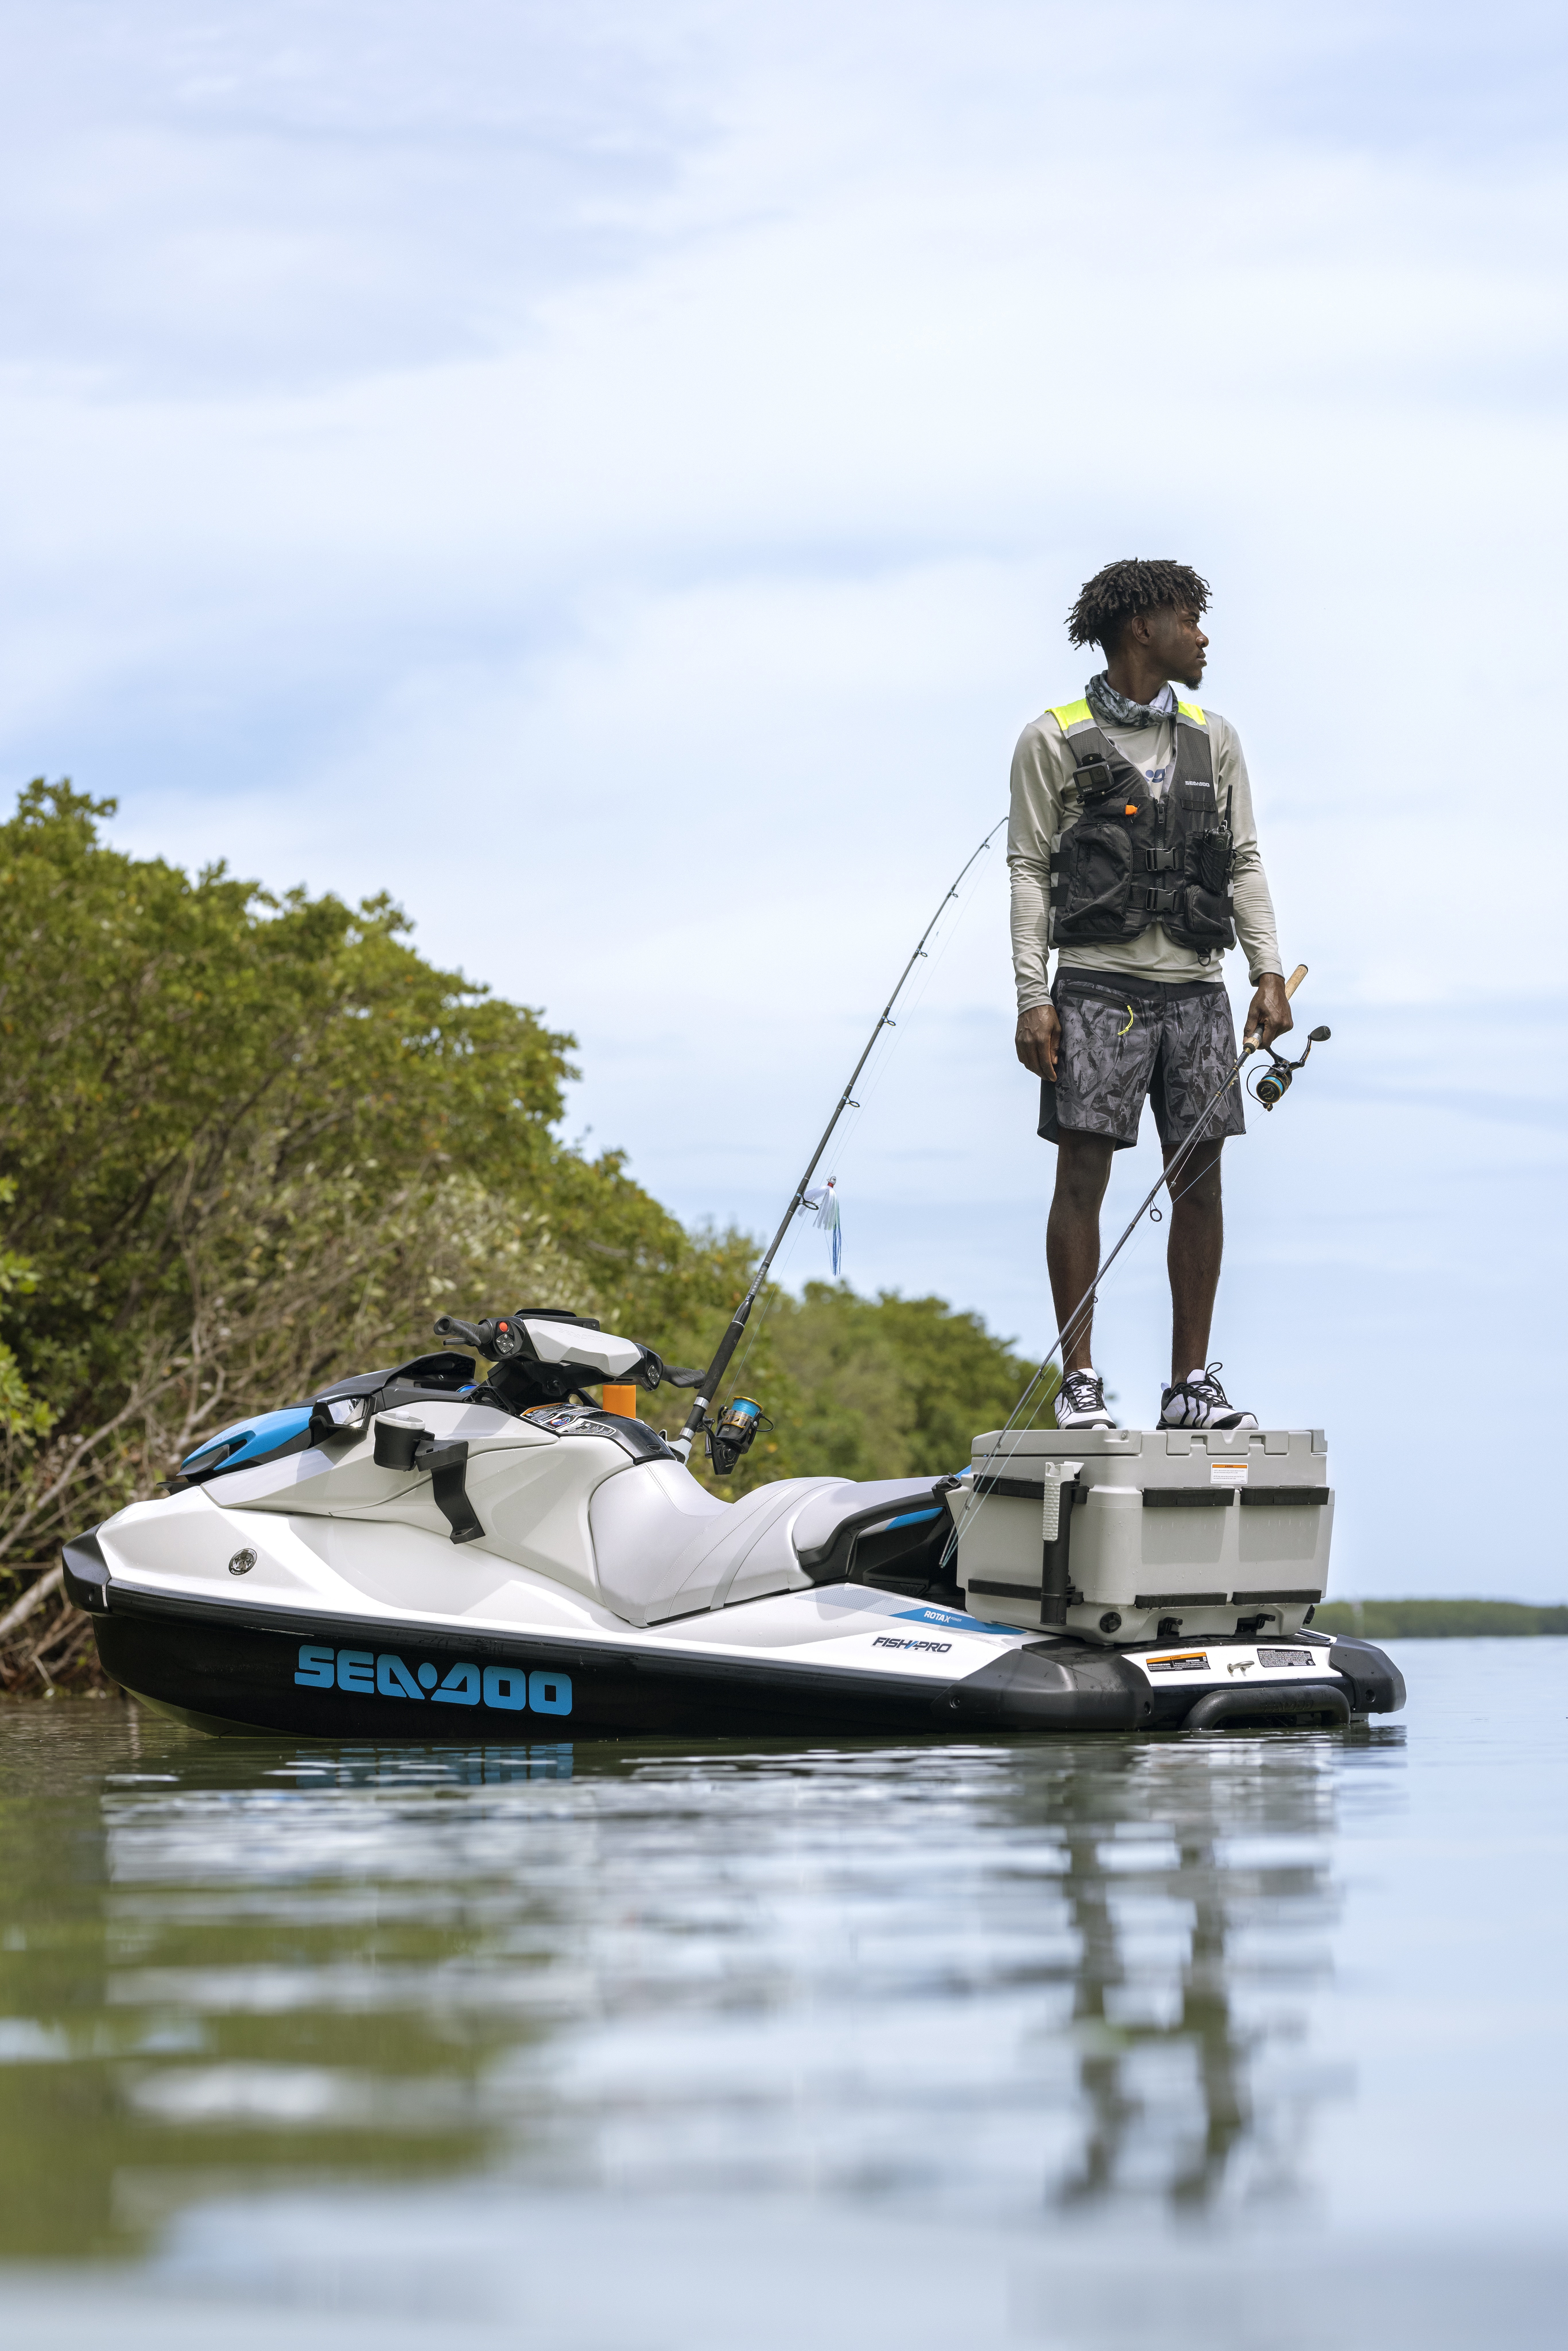 LEVEL UP YOUR FISHING WITH THE ALL-NEW 2022 SEA-DOO FISH PRO FAMILY